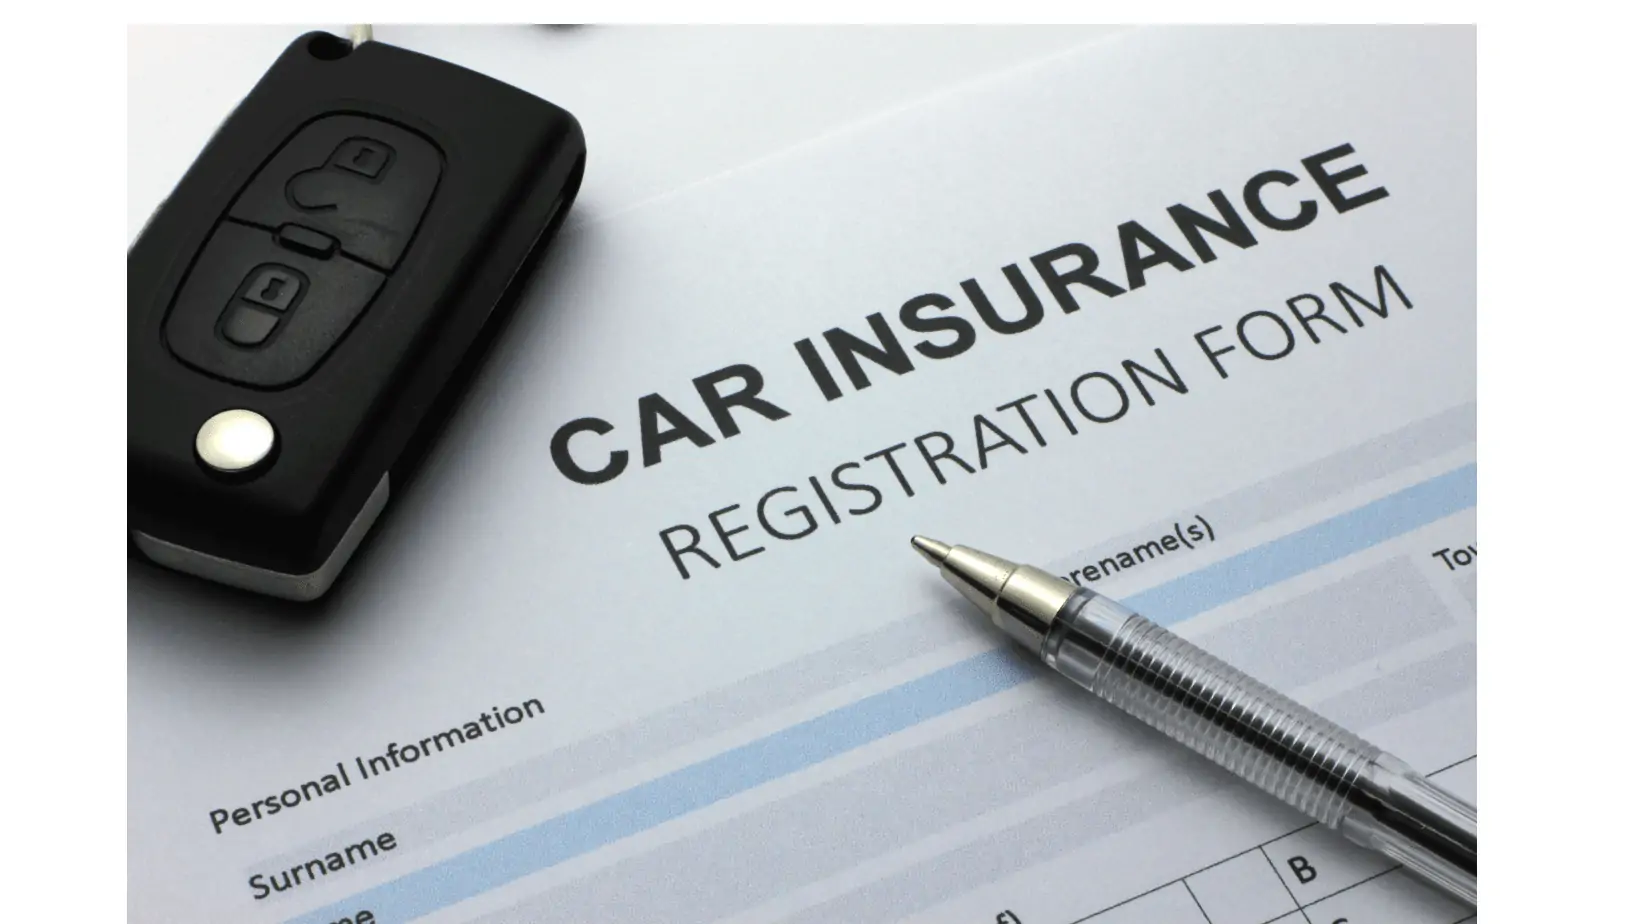 Car Insurance in South Africa: What You Need to Know About Third Party and Comprehensive Coverage